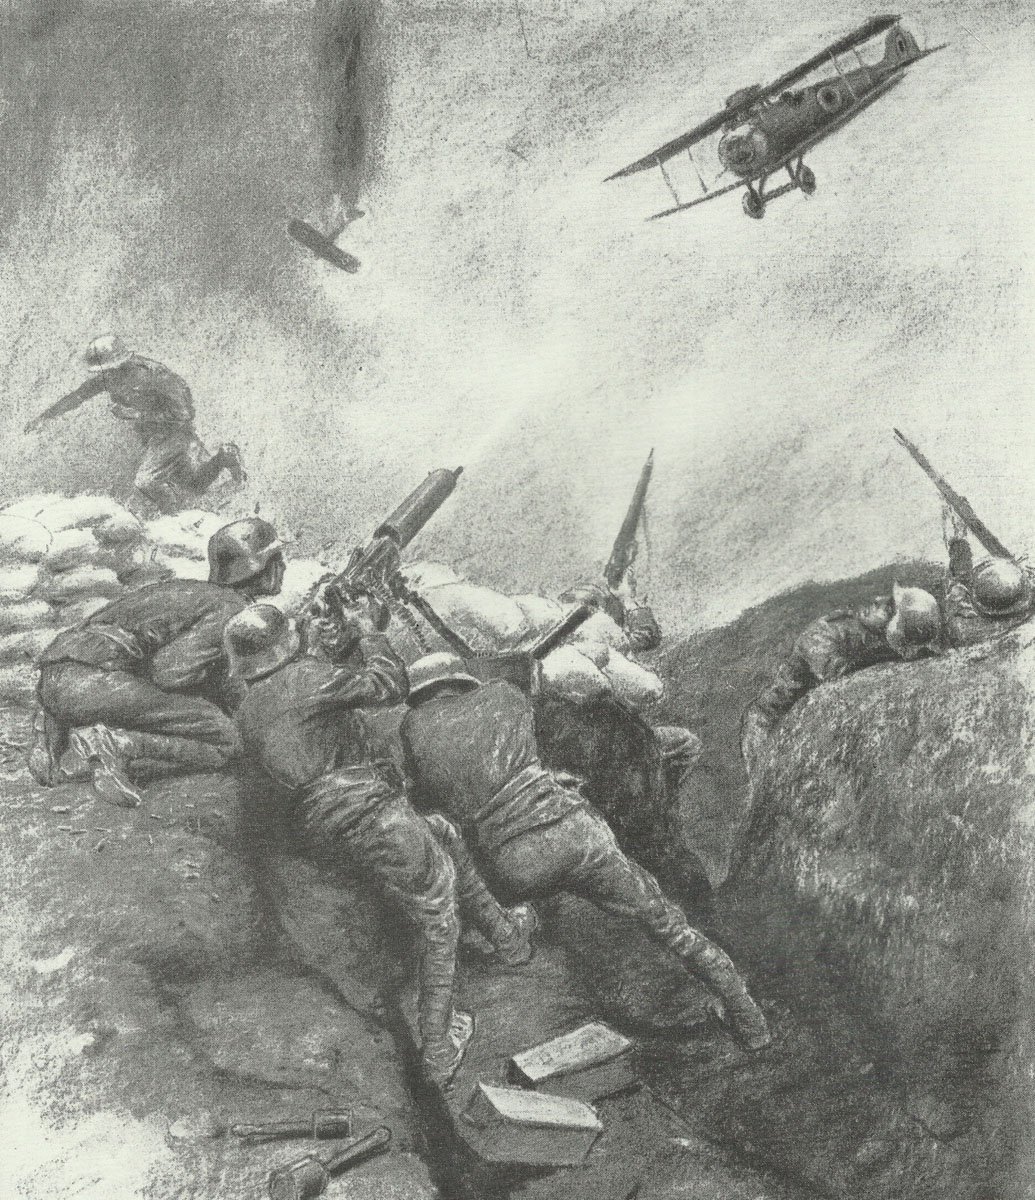 Austrian-Hungarian troops fought strafing British planes